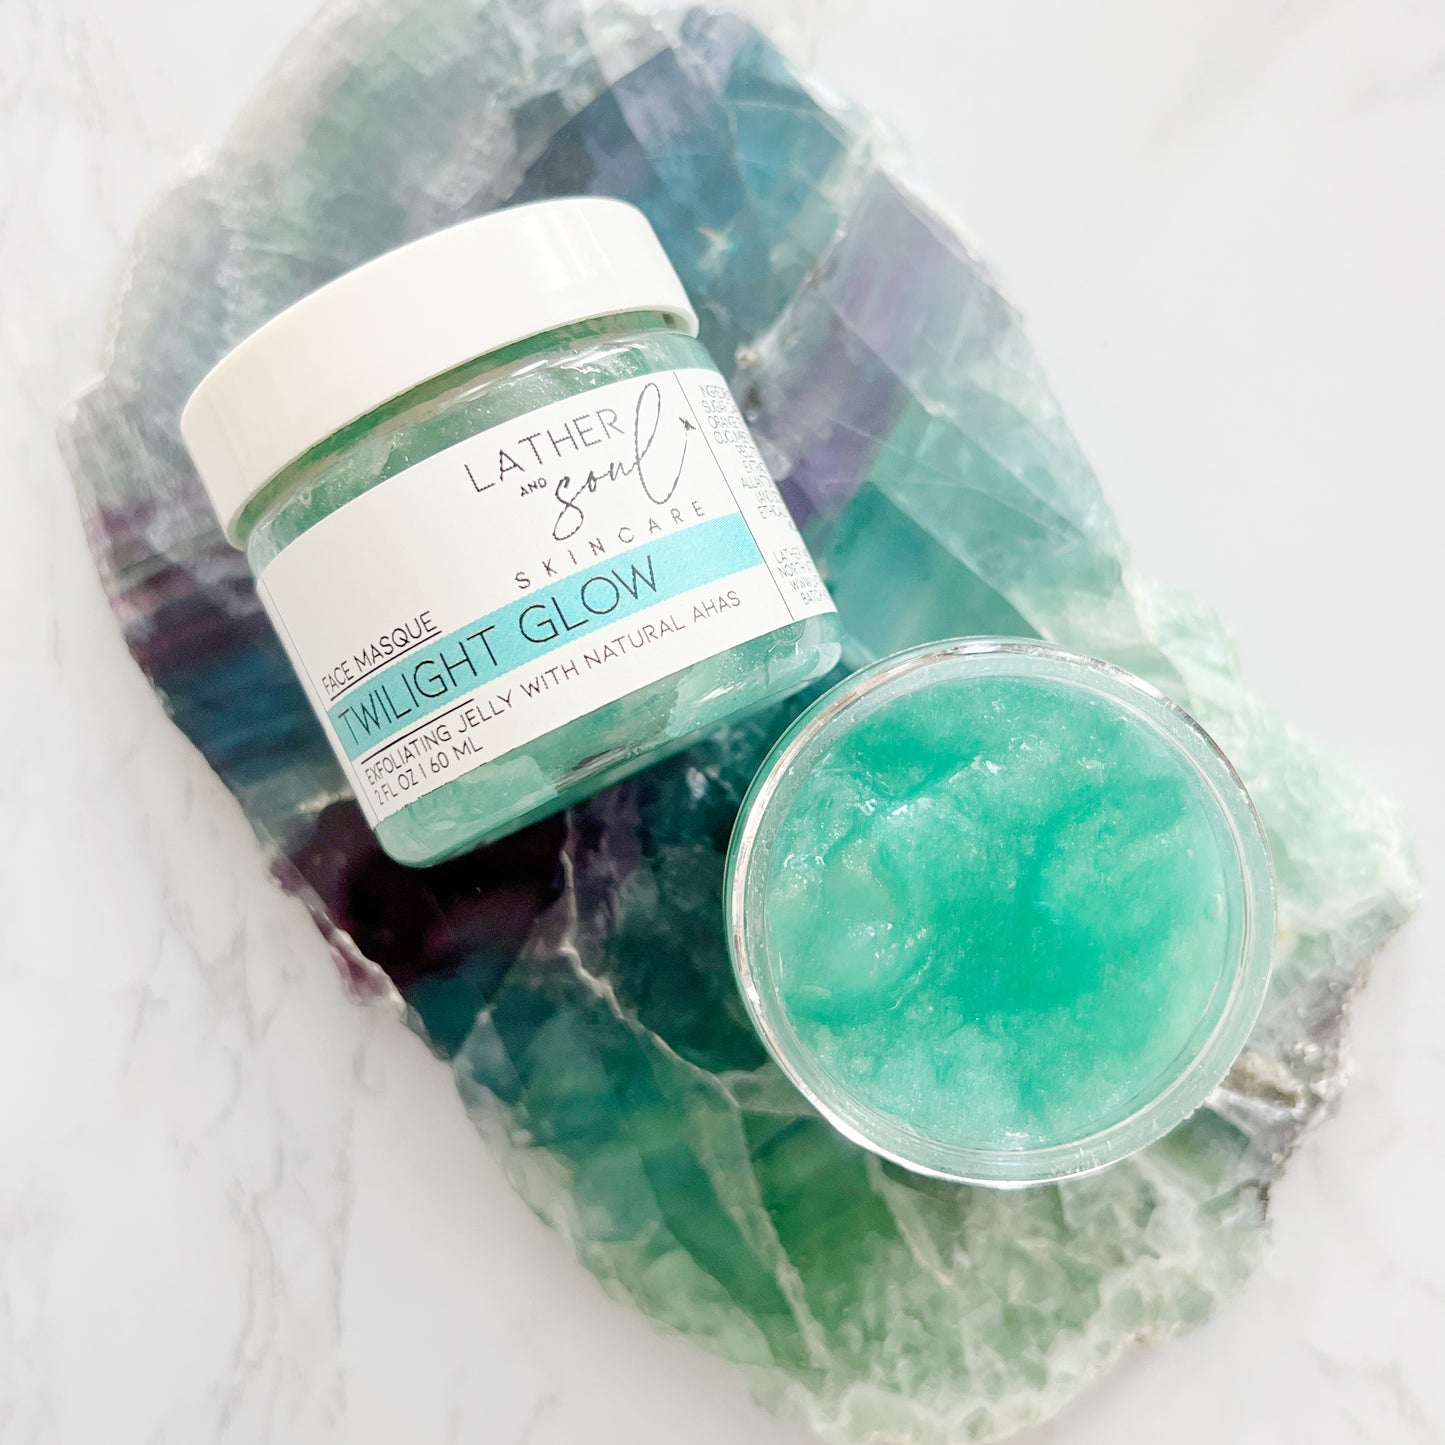 Jelly masque with exfoliating AHAs for a more youthful appearance 